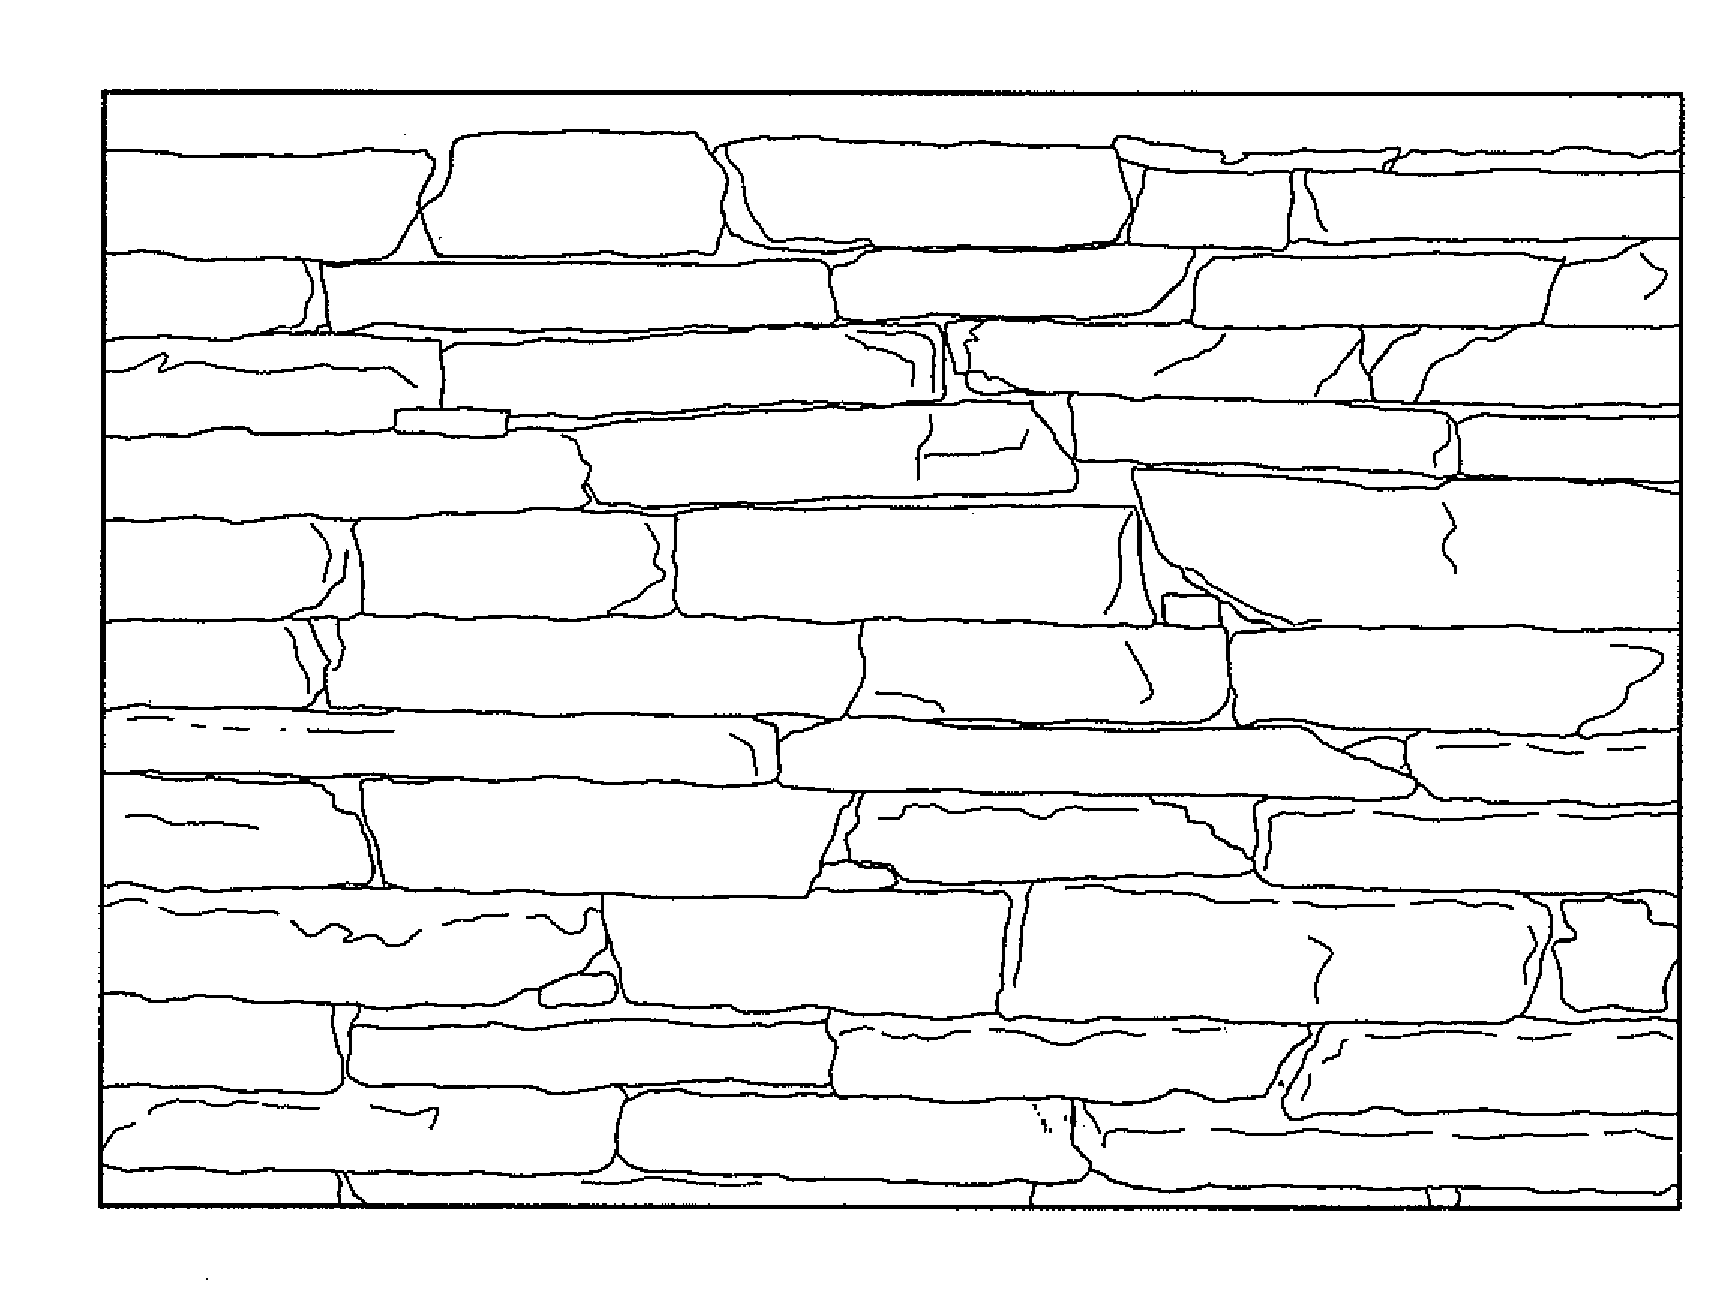 Stone fabrication system with hidden mortar joint